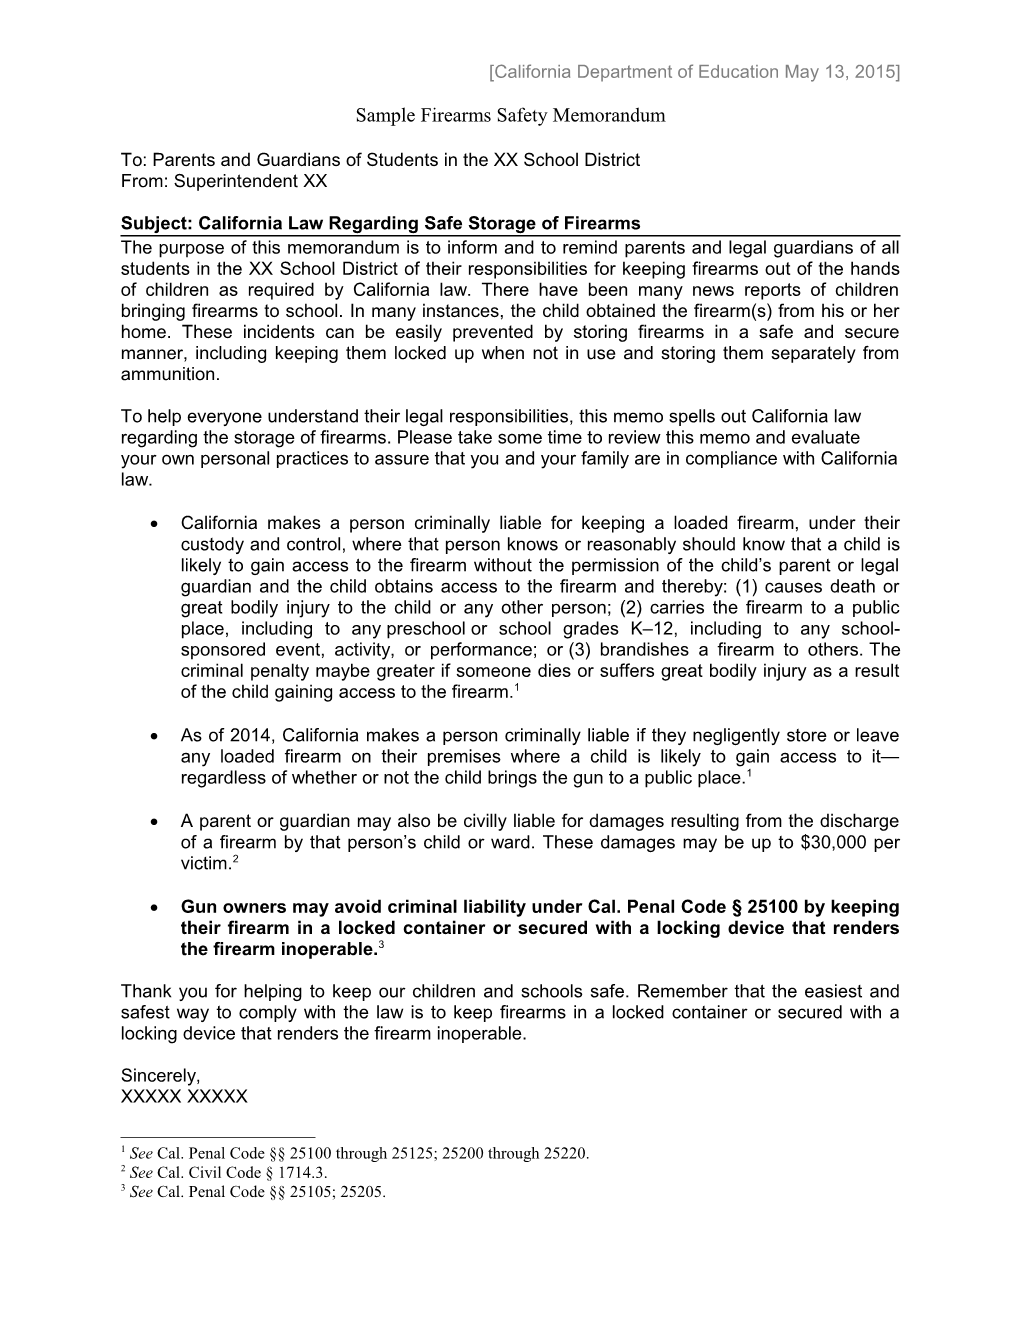 Sample Firearms Safety Memorandum in English - 2015 SSPI Letters (CA Dept. of Education)